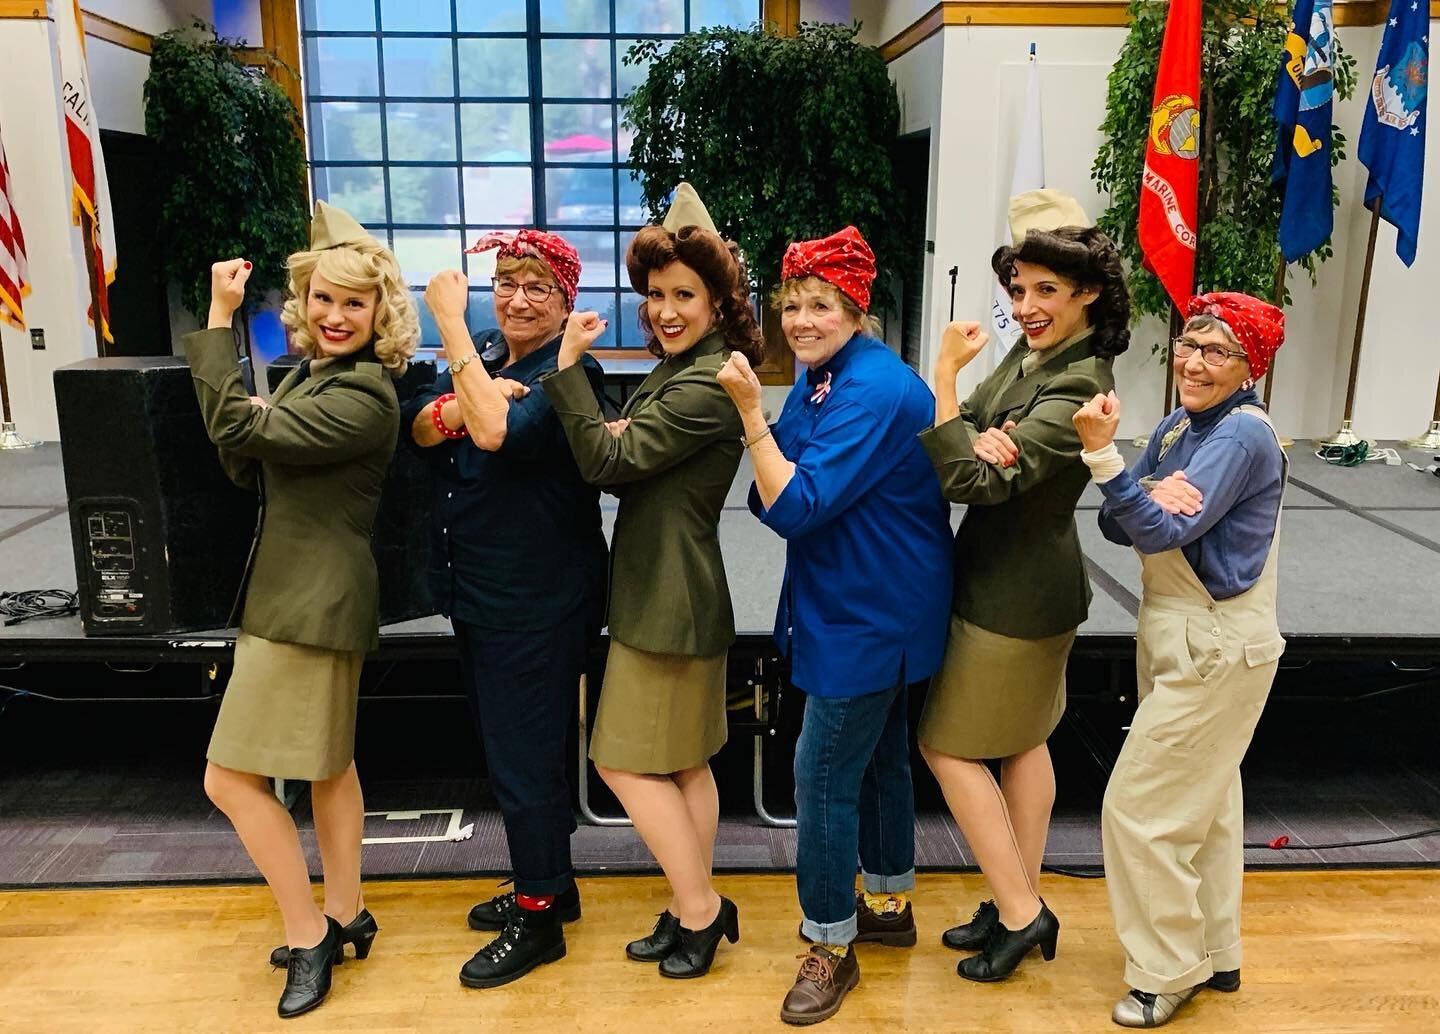 Did you know that it&rsquo;s National Spirit of &lsquo;45 Day? Ever heard of it? It honors the legacy of the men and women of the Greatest Generation, who overcame the Great Depression, and fought in World War II or supported the war effort. Here we 